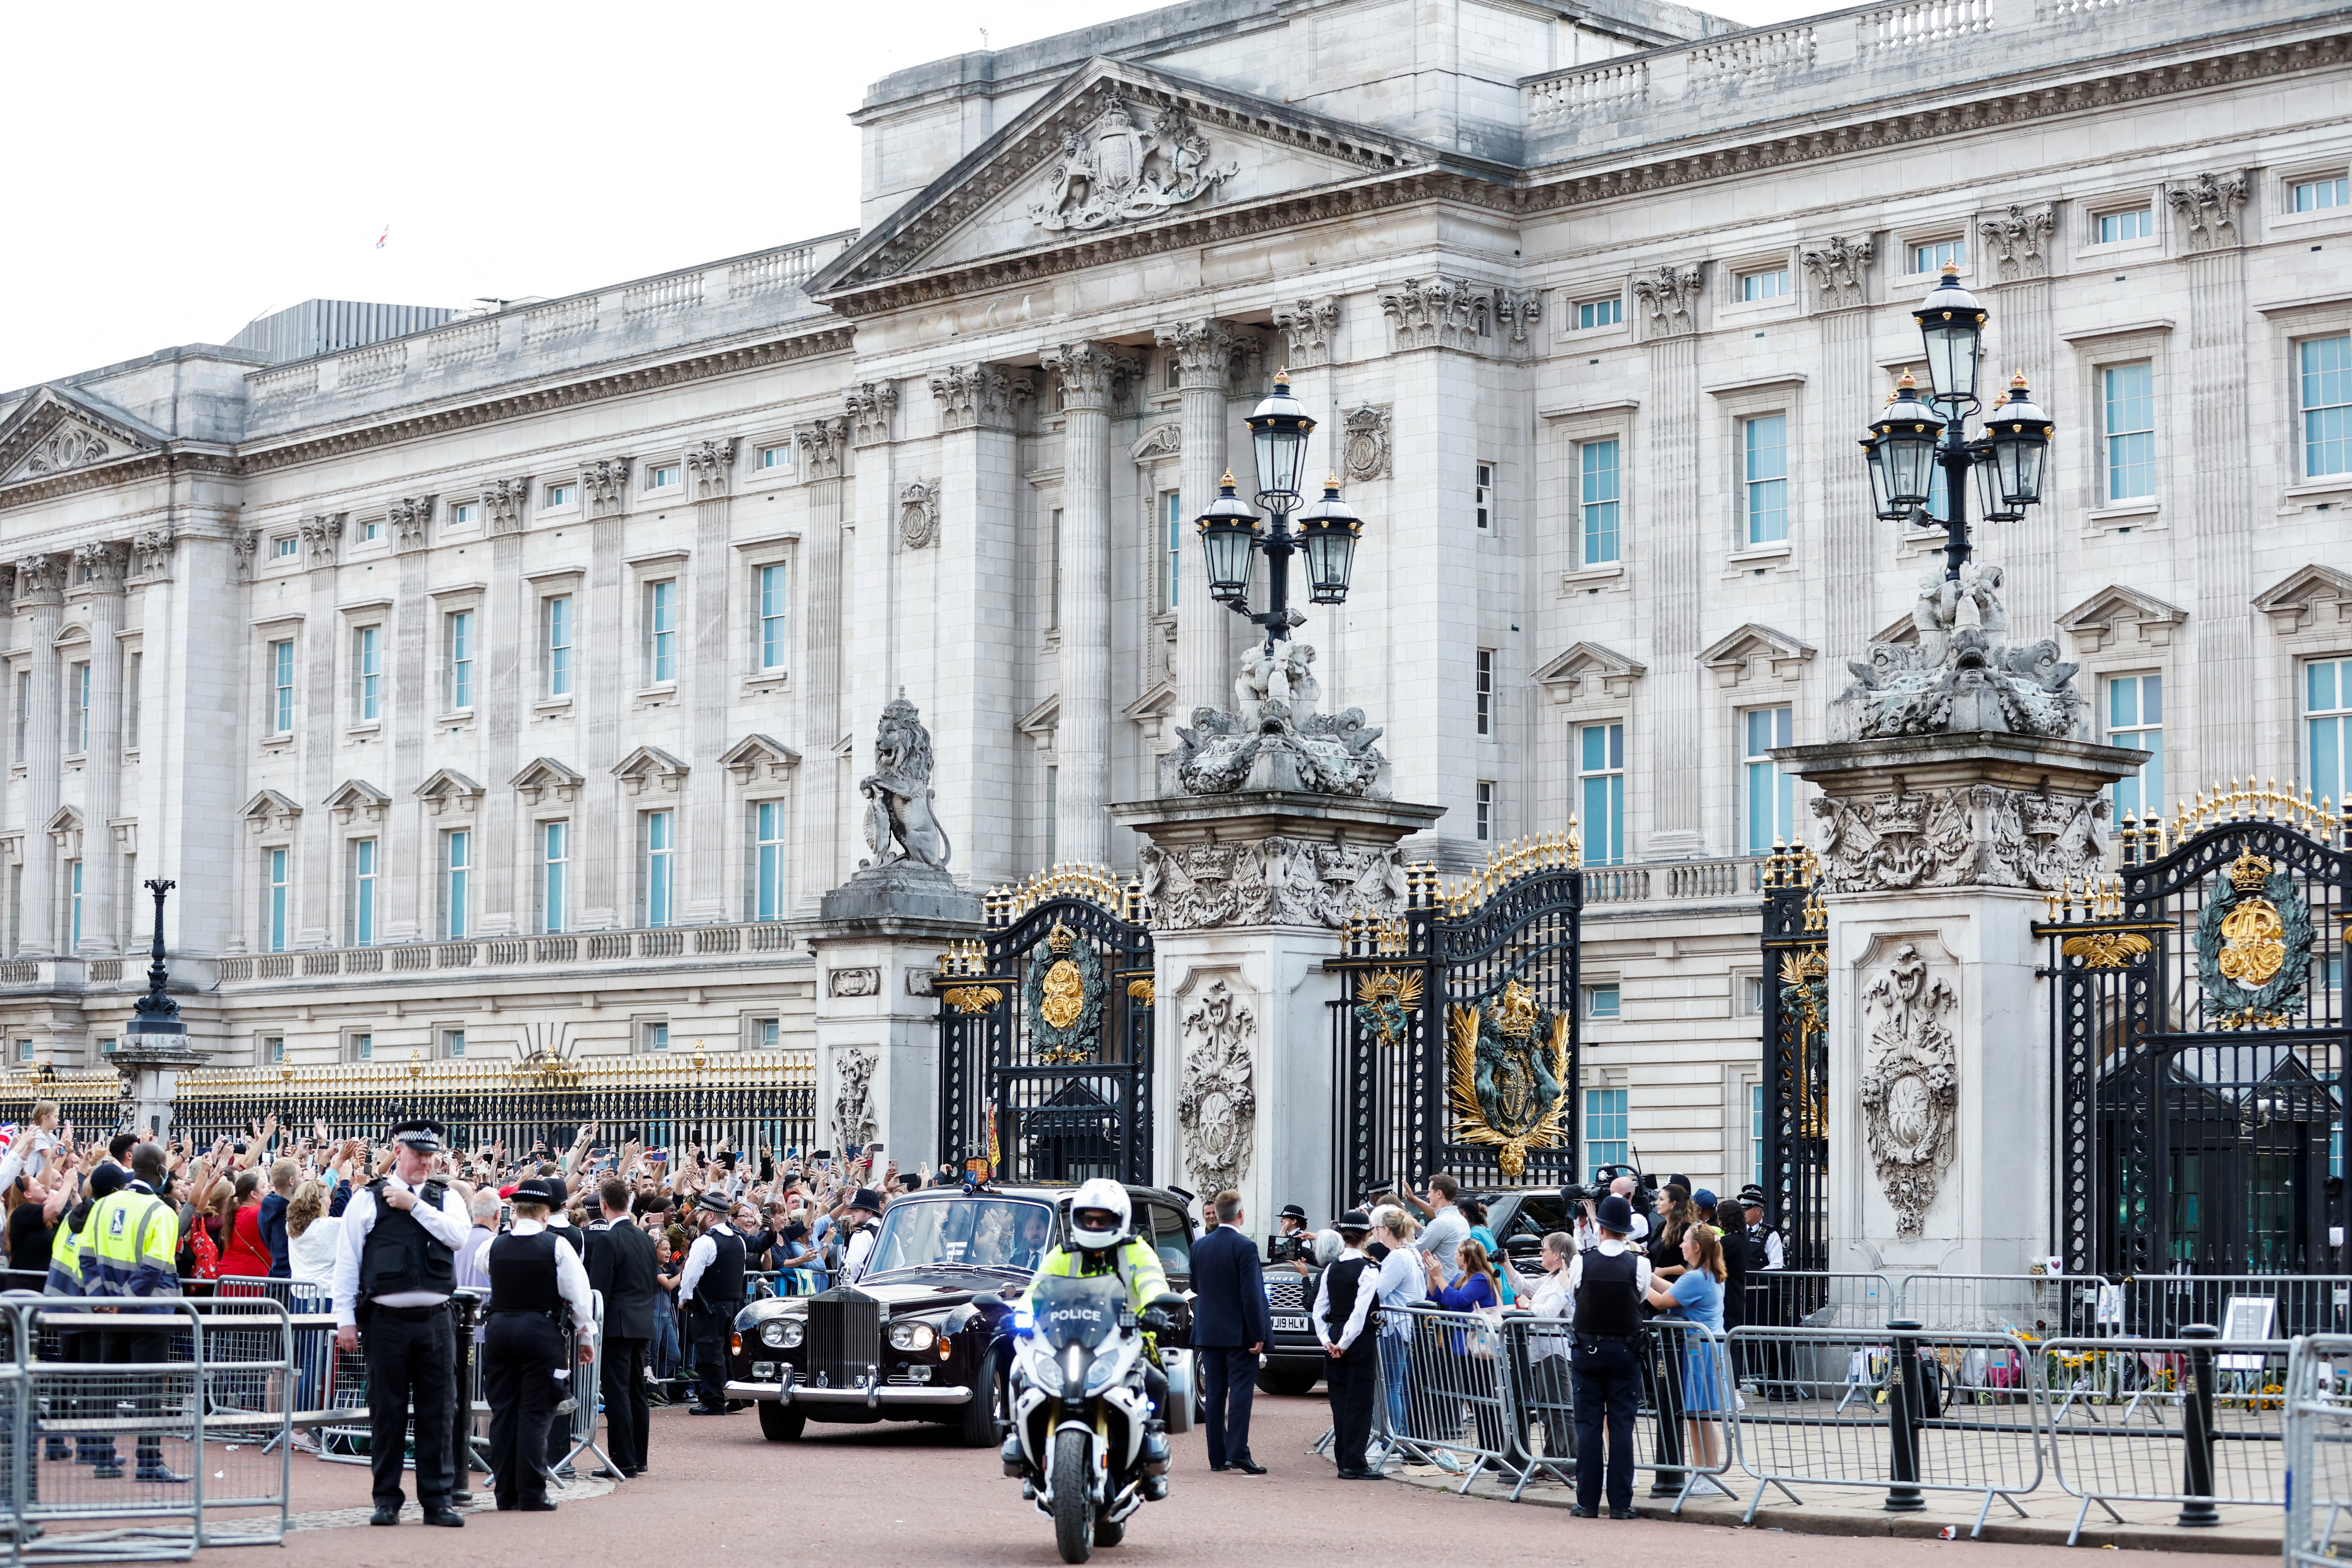 The vehicle carrying Britain's King Charles leaves Buckingham Palace, following the passing of Britain's Queen Elizabeth, in London, Britain, September 10, 2022. REUTERS/Peter Cziborra